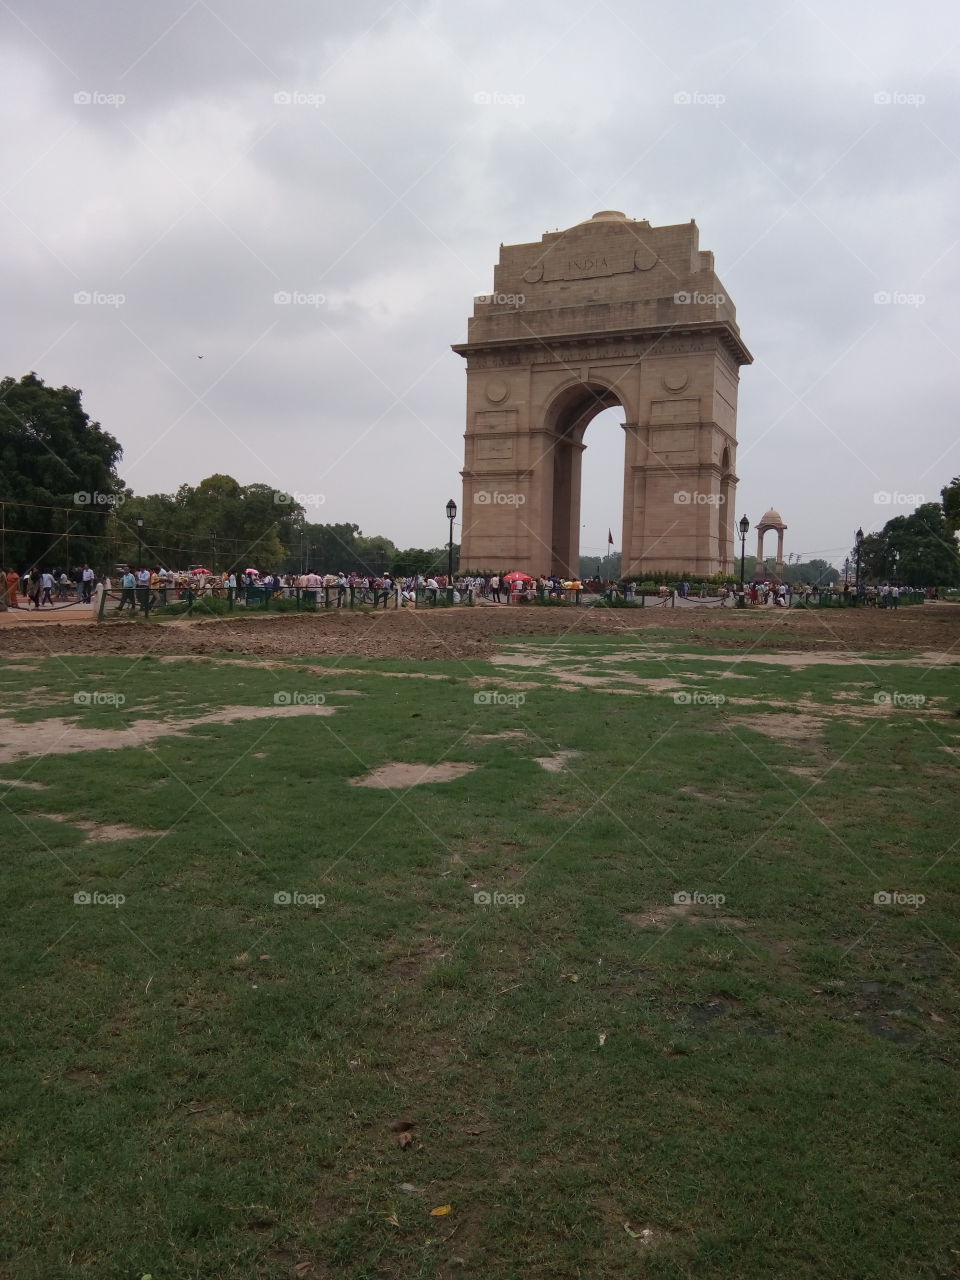 India Gate its famous on india